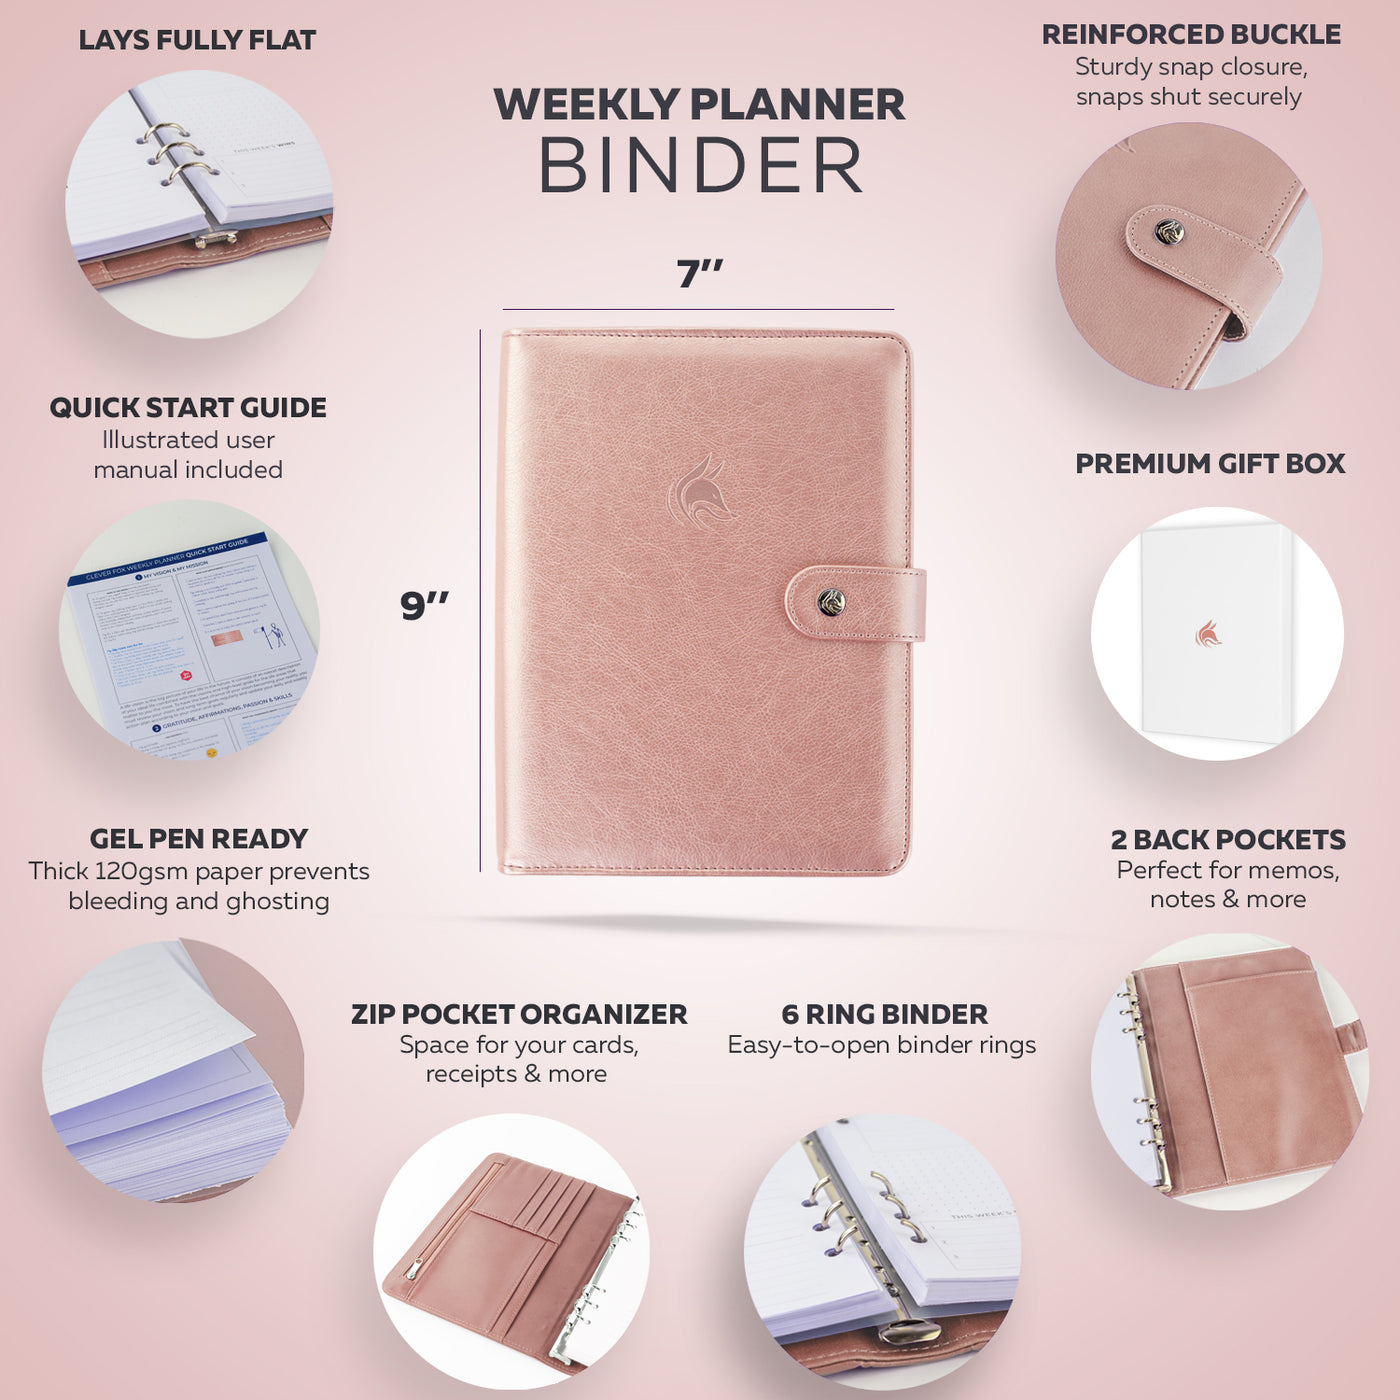 Weekly Planner Binder -Stay On Track & Never Miss Important Dates